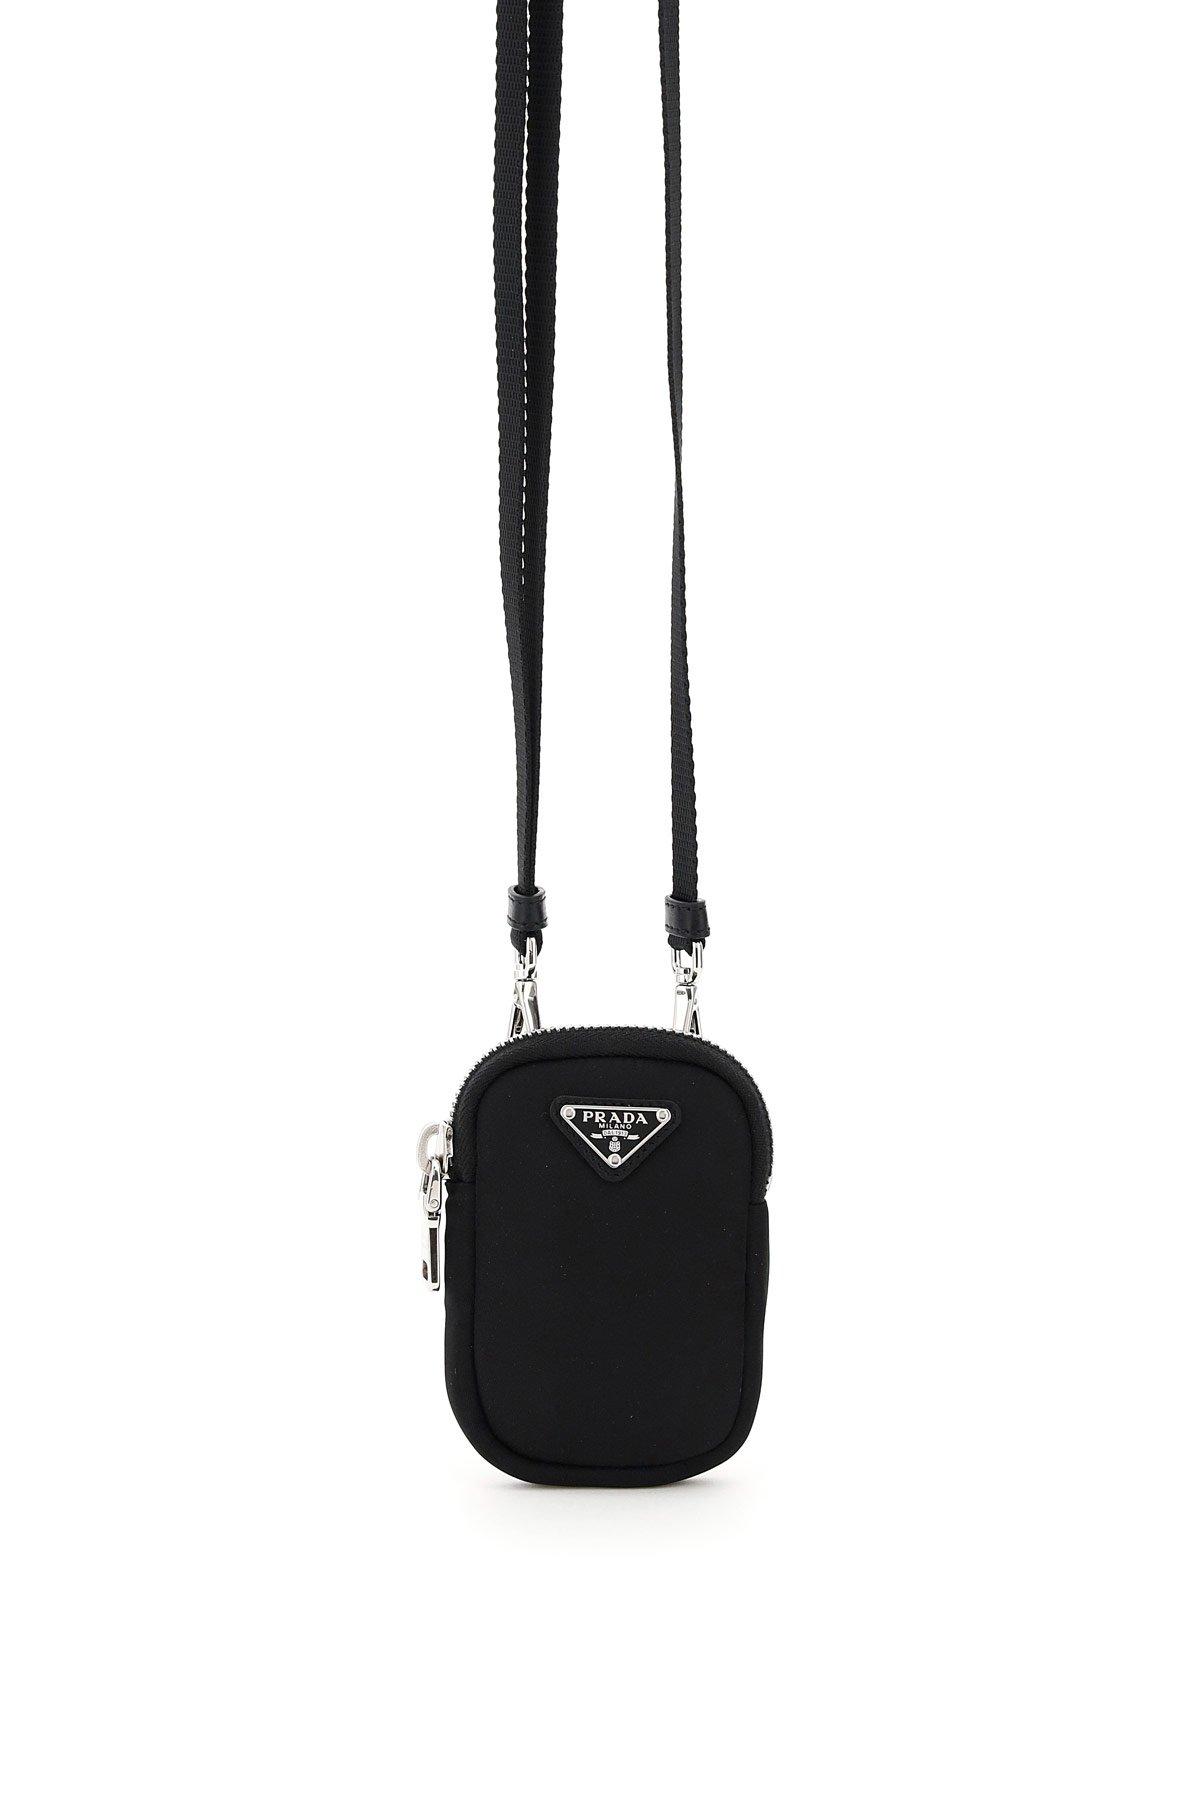 Prada Synthetic Mini Pouch With Shoulder Strap in Black | Lyst